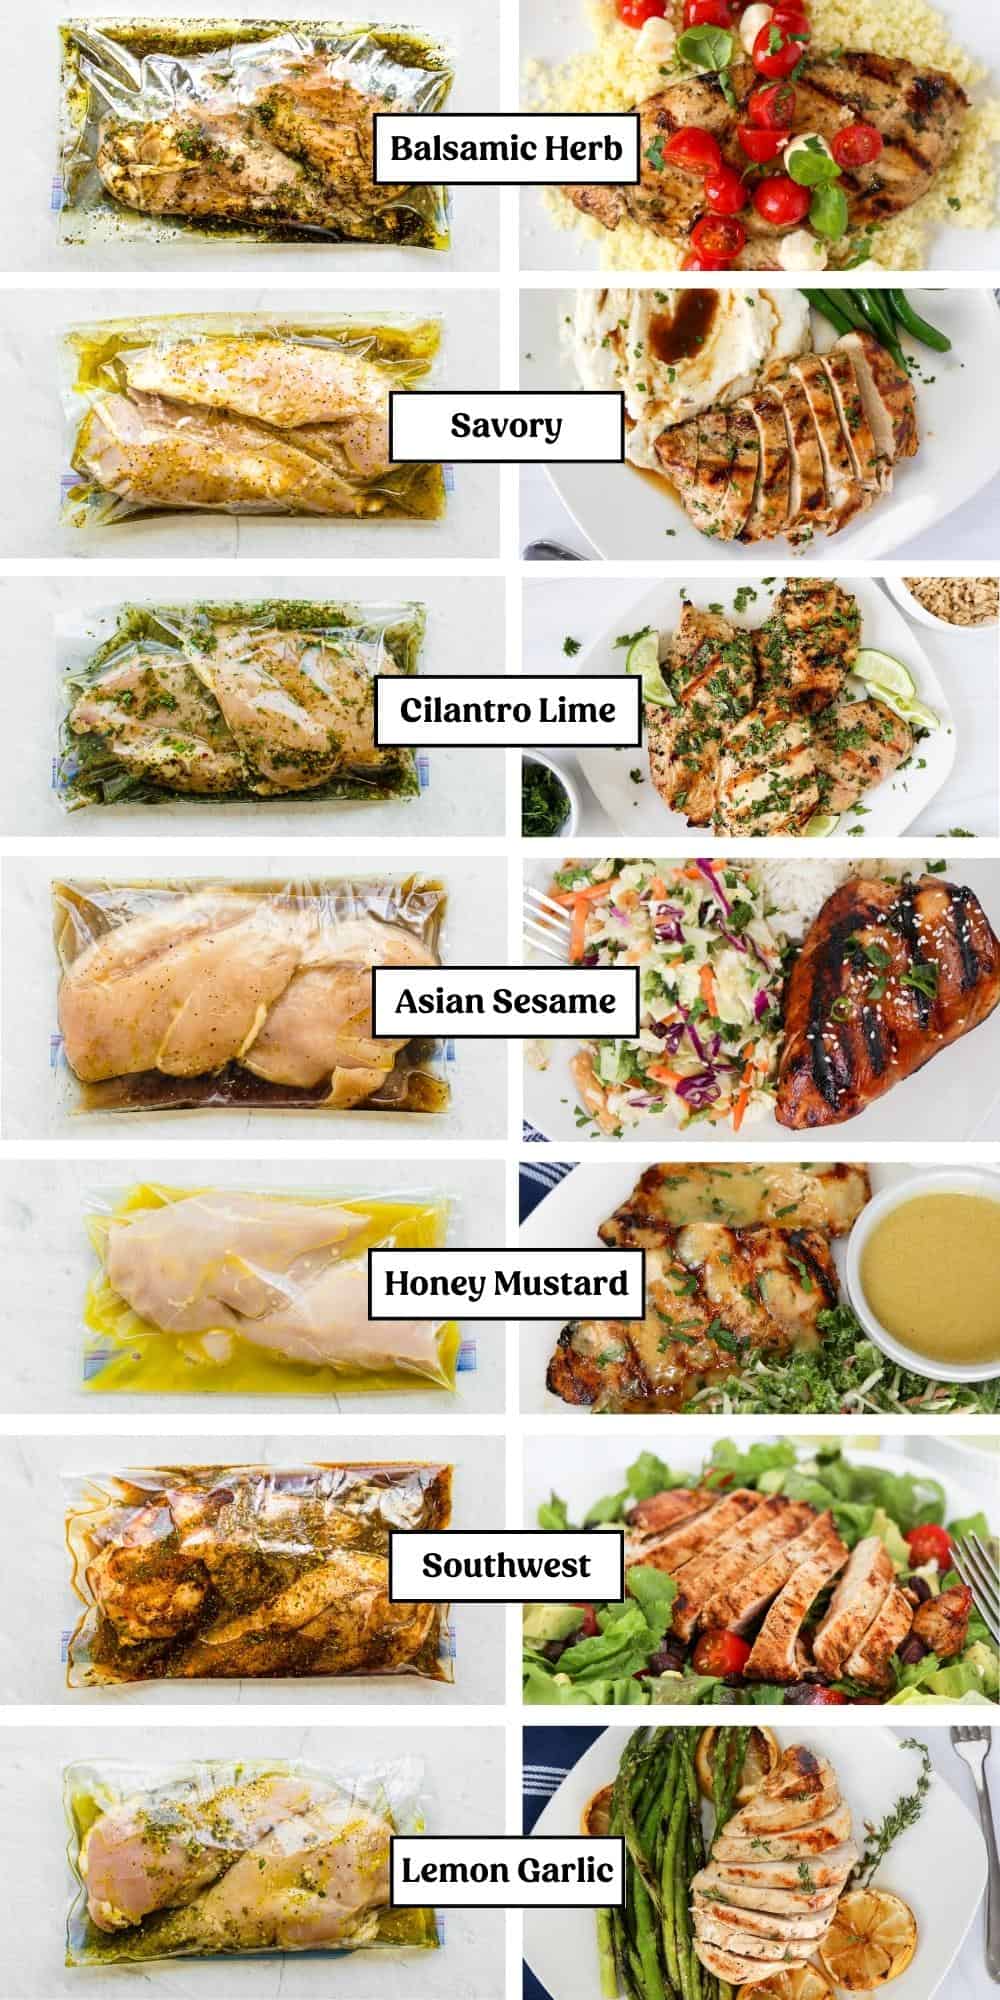 These 7 well-tested, easy chicken marinades will transform boneless chicken breasts into several tasty, healthy meals. We'll show you four different methods for cooking your marinated chicken, plus how to make them into freezer meals for later.